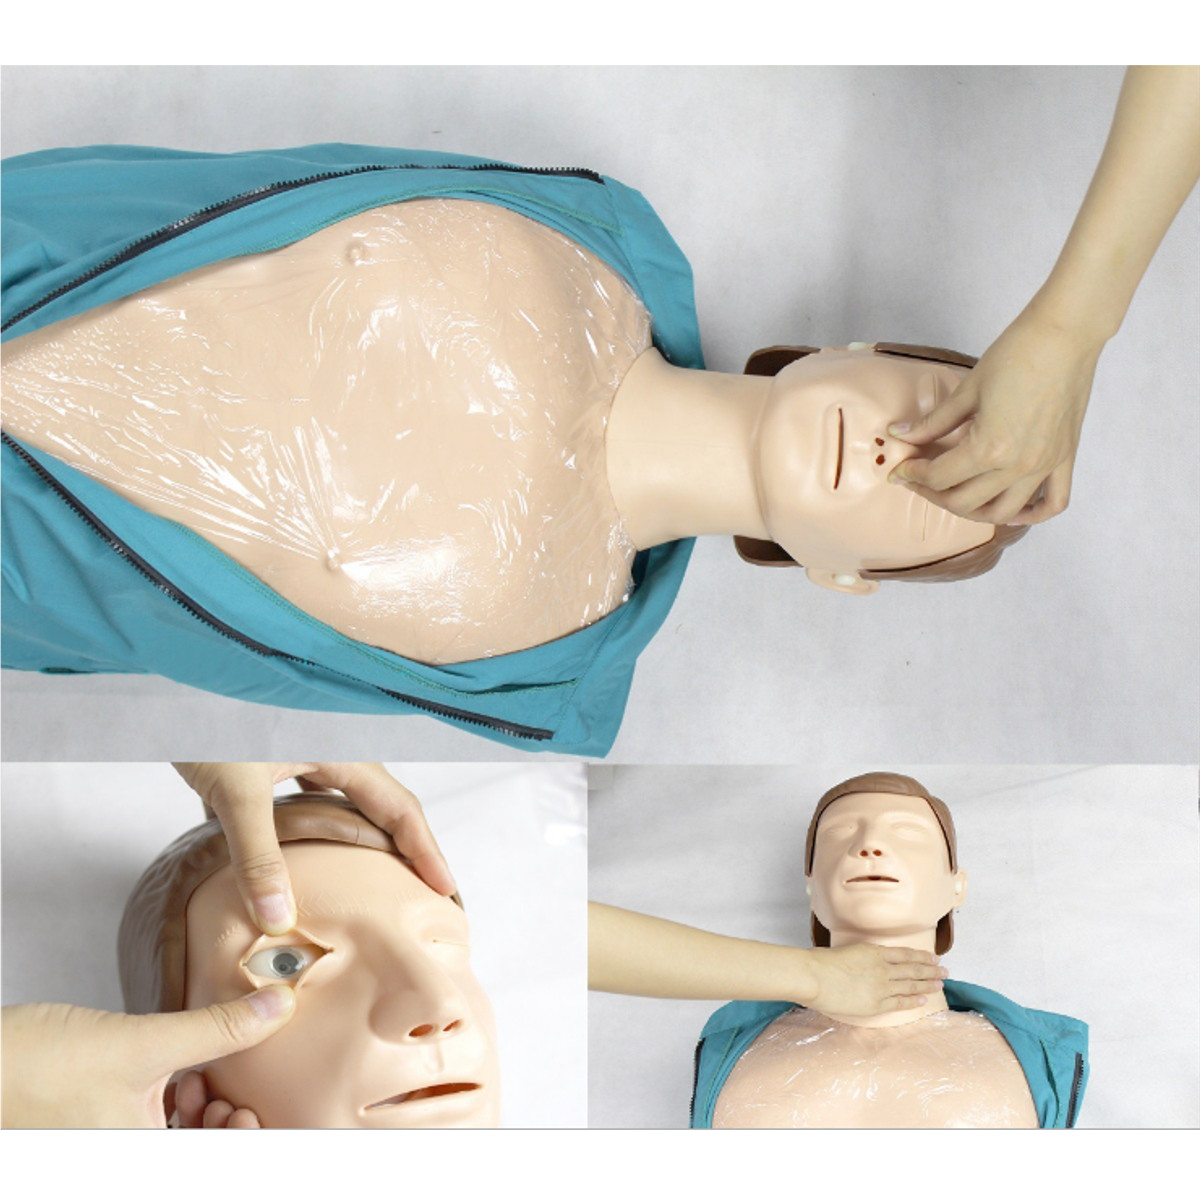 CPR Adult Manikin AED First Aid Training Dummy Training Medical Model Respiration Human 13